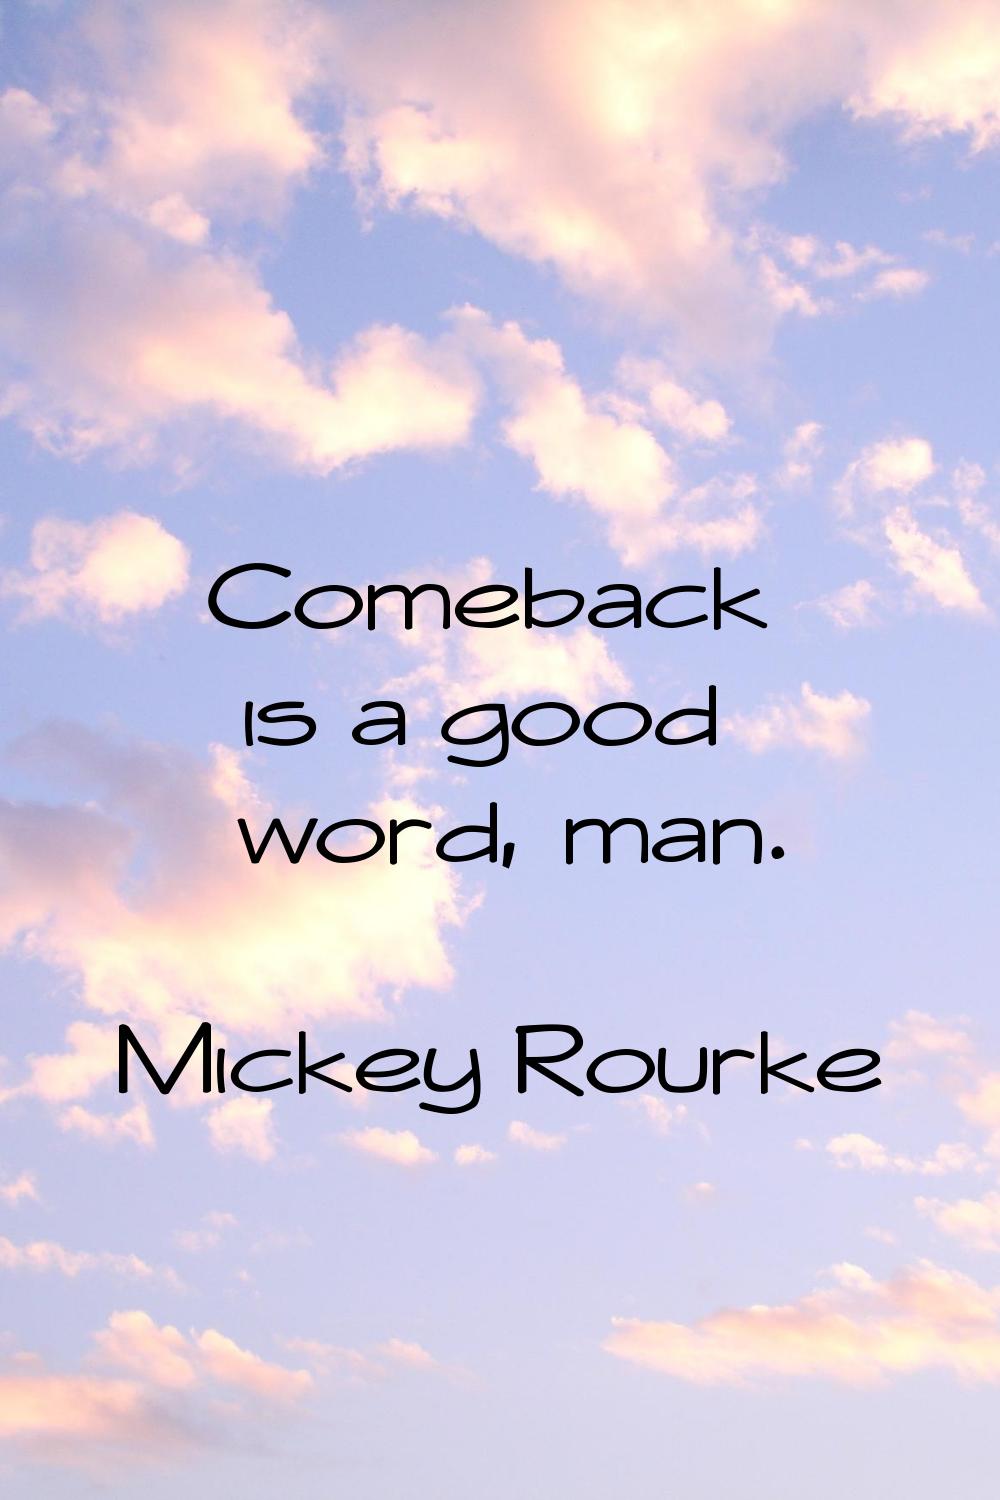 Comeback is a good word, man.